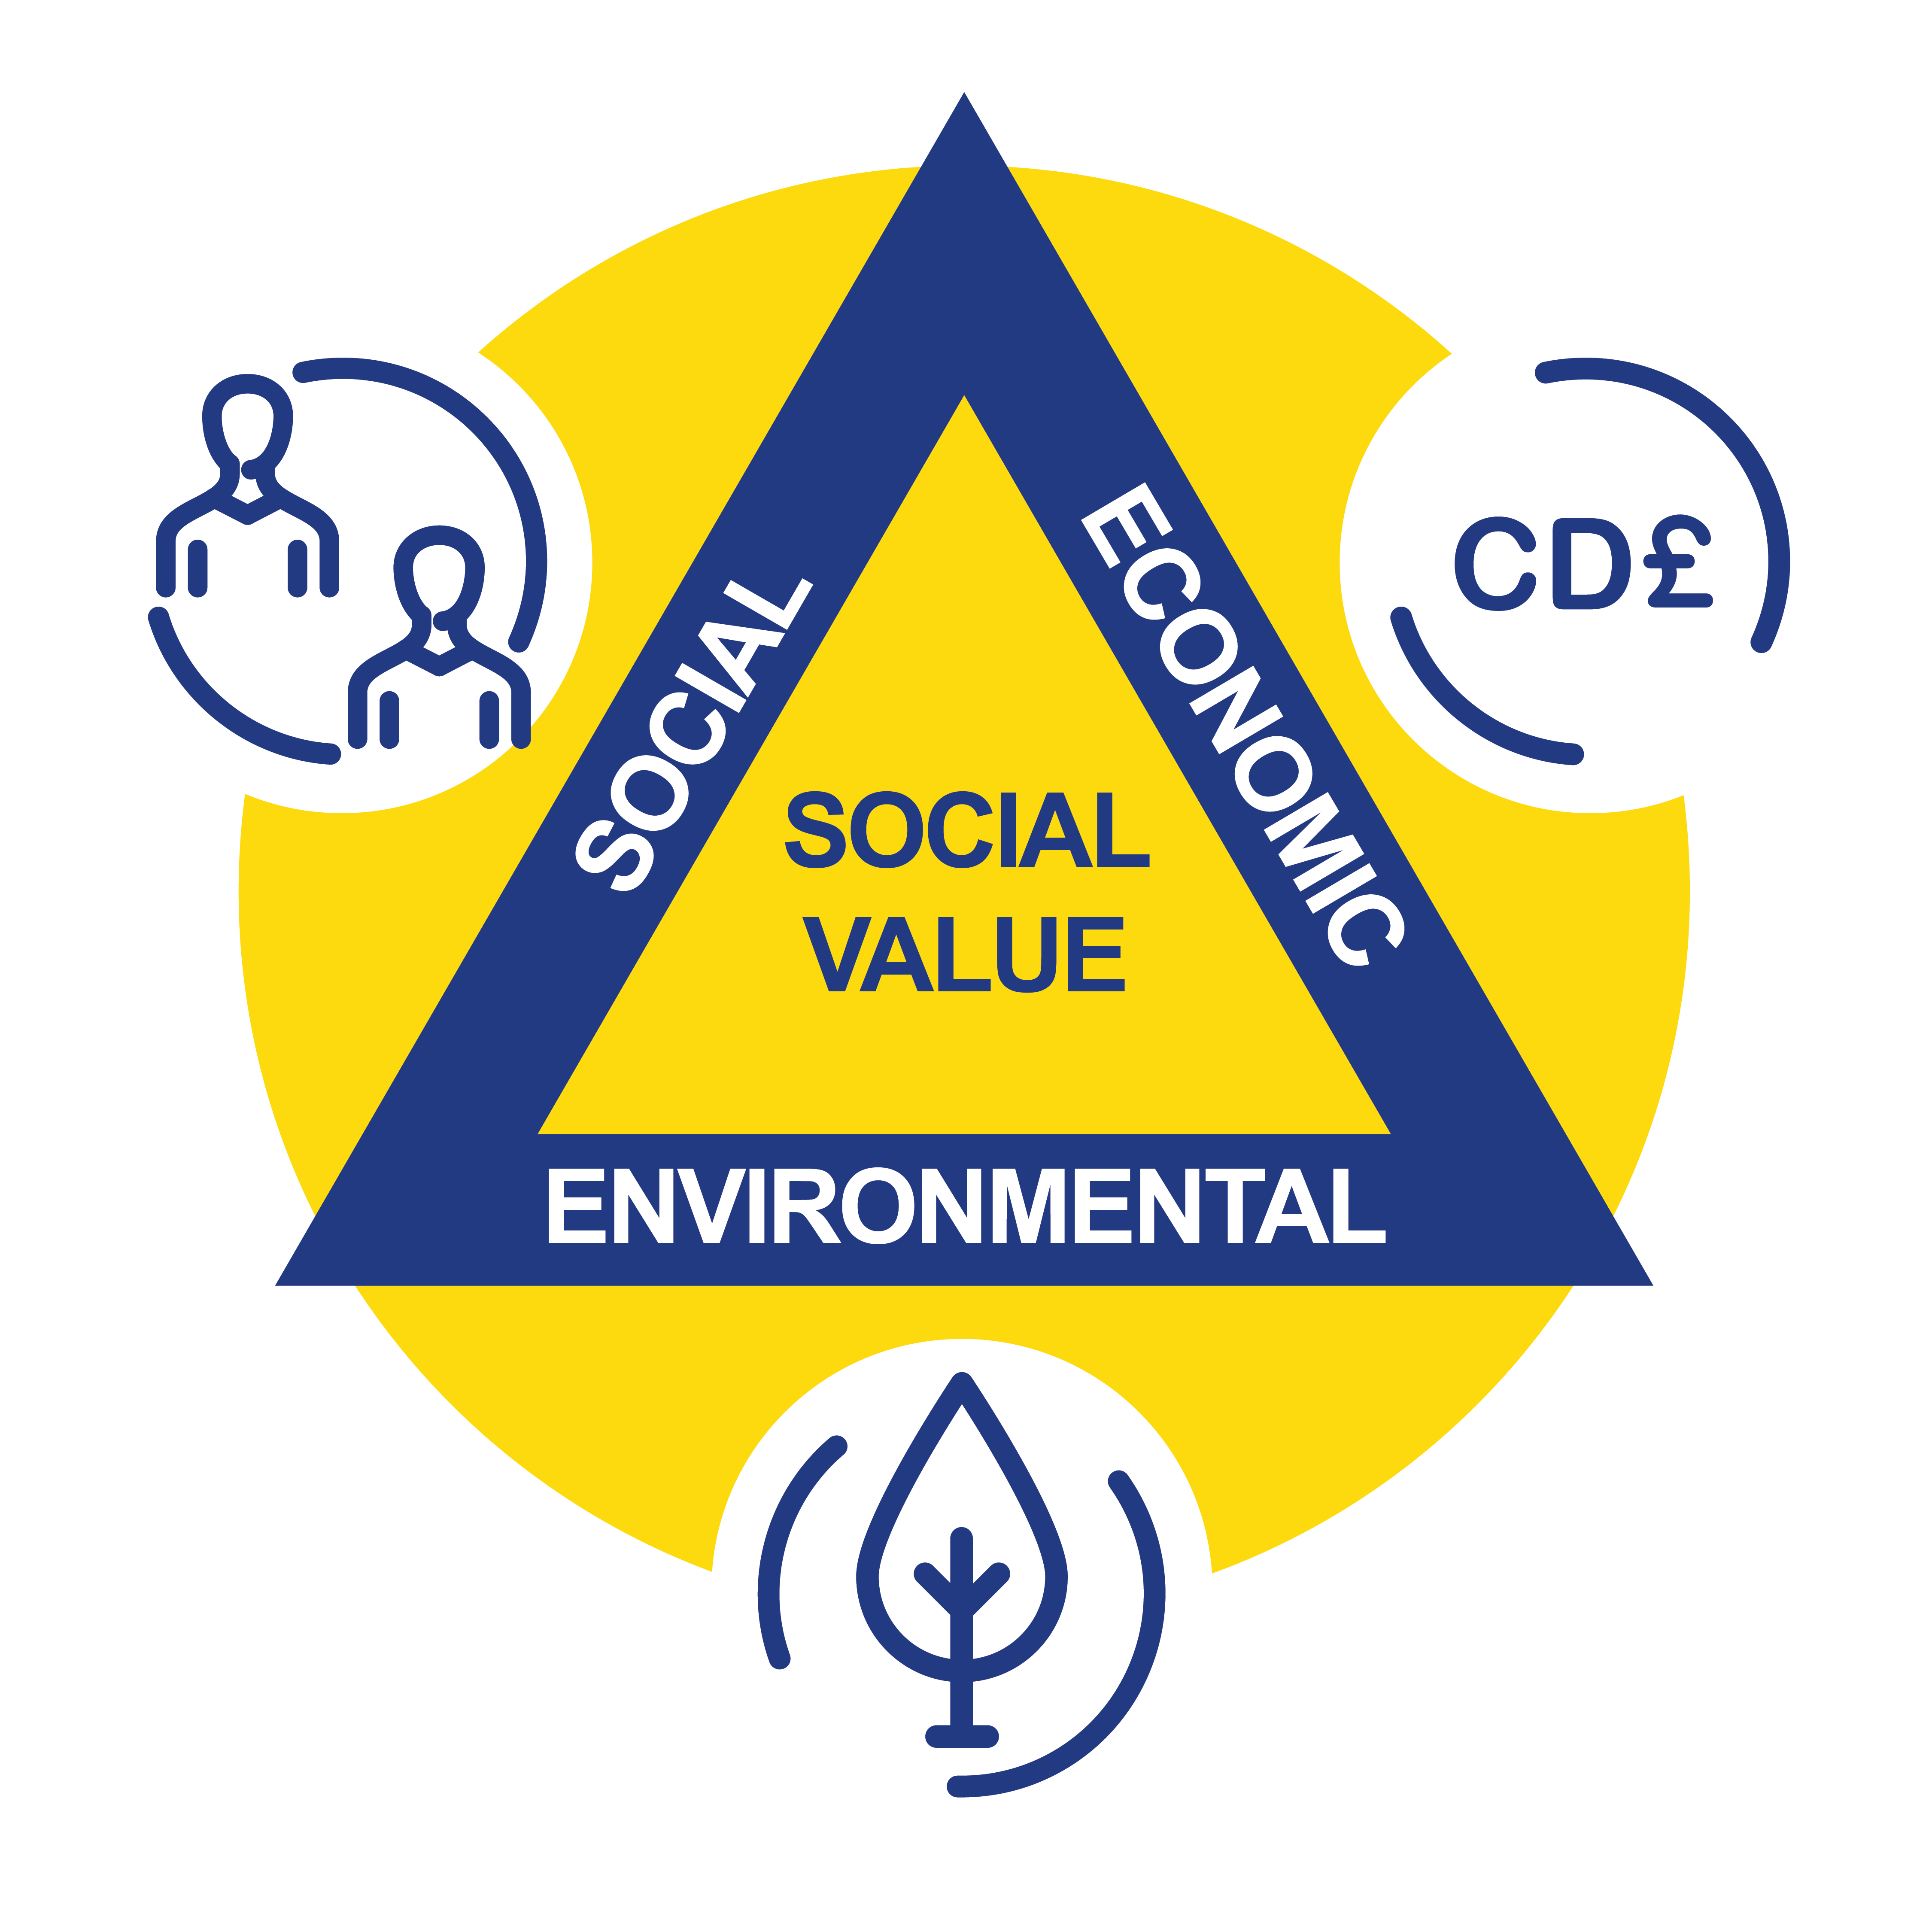 the values that make up Social Value